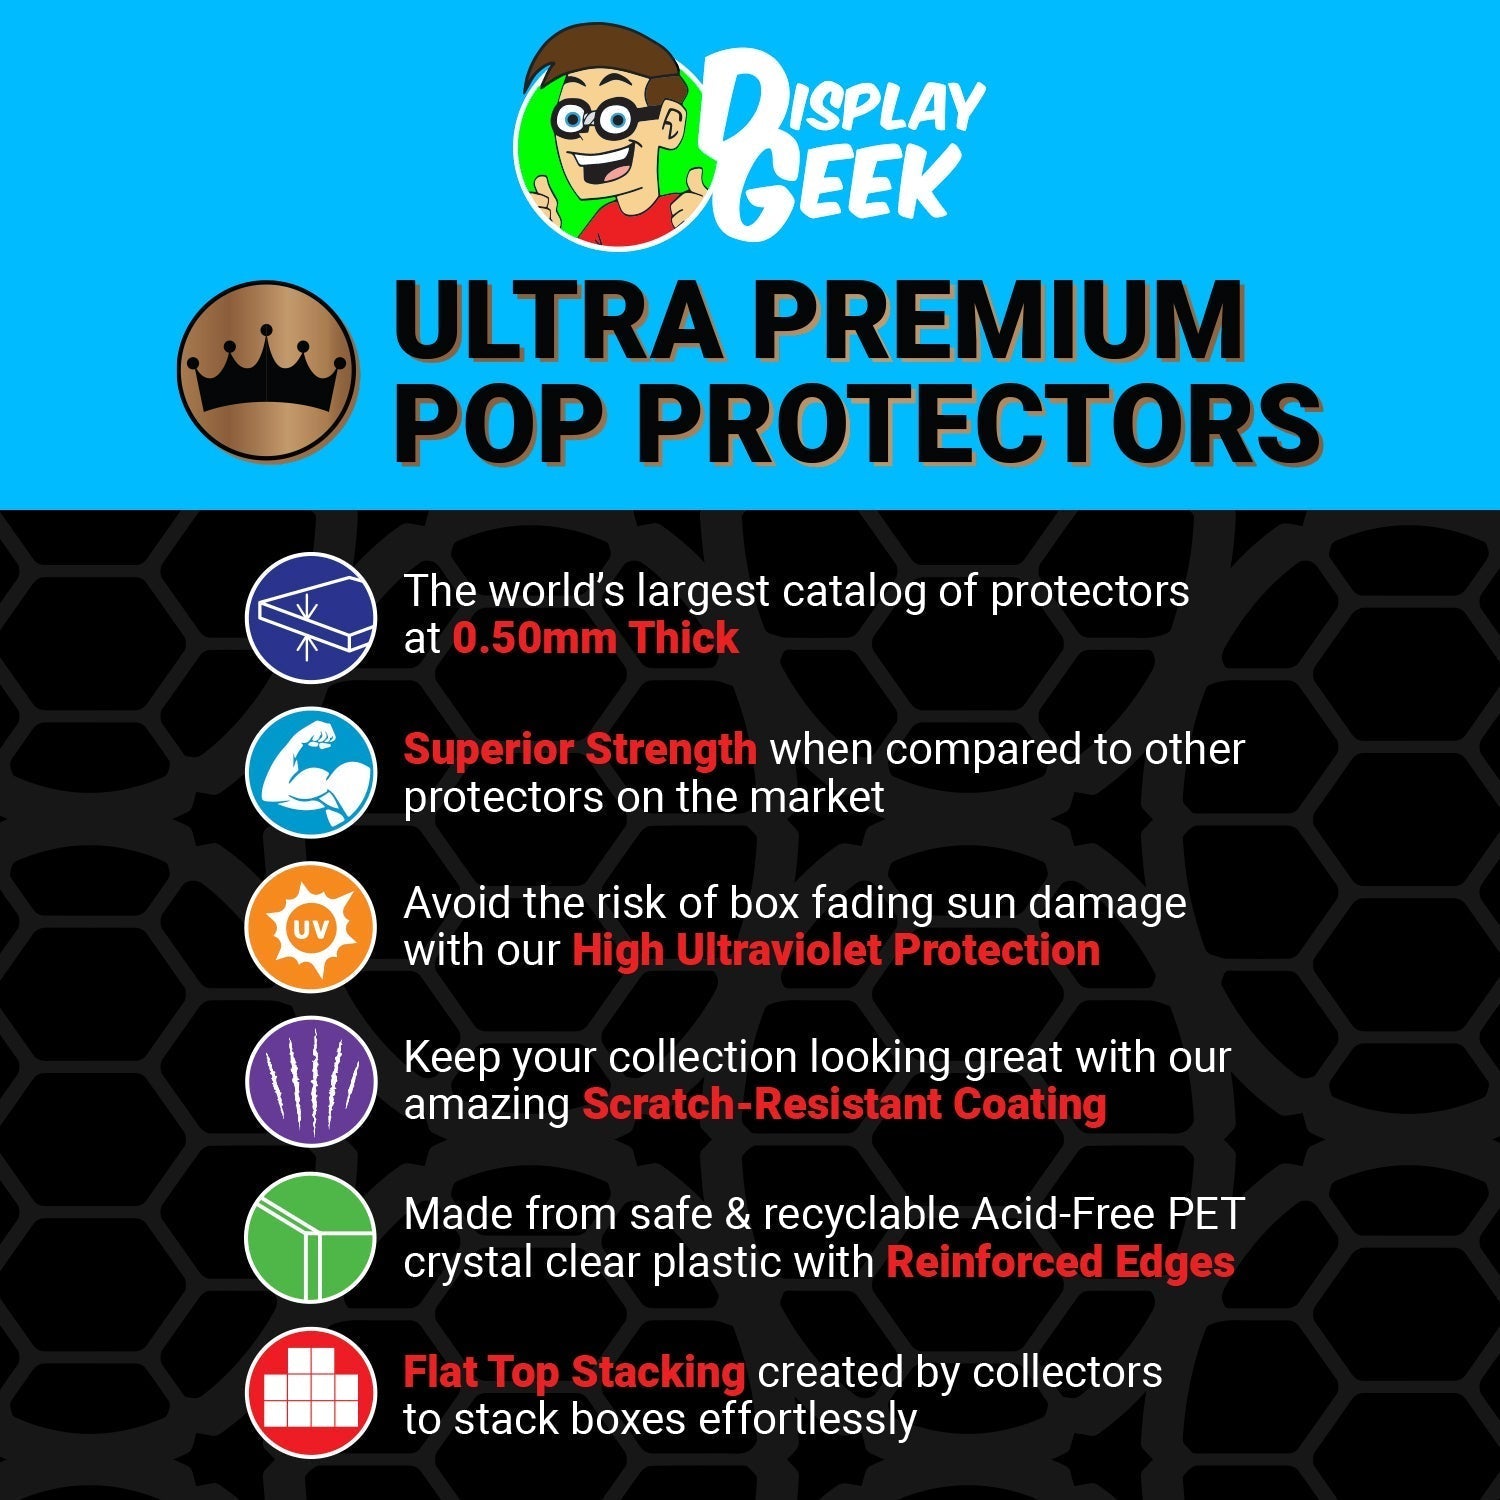 Pop Protector for 10 inch Jack Skellington with Zero Blacklight #809 Funko Pop - PPG Pop Protector Guide Search Created by Display Geek